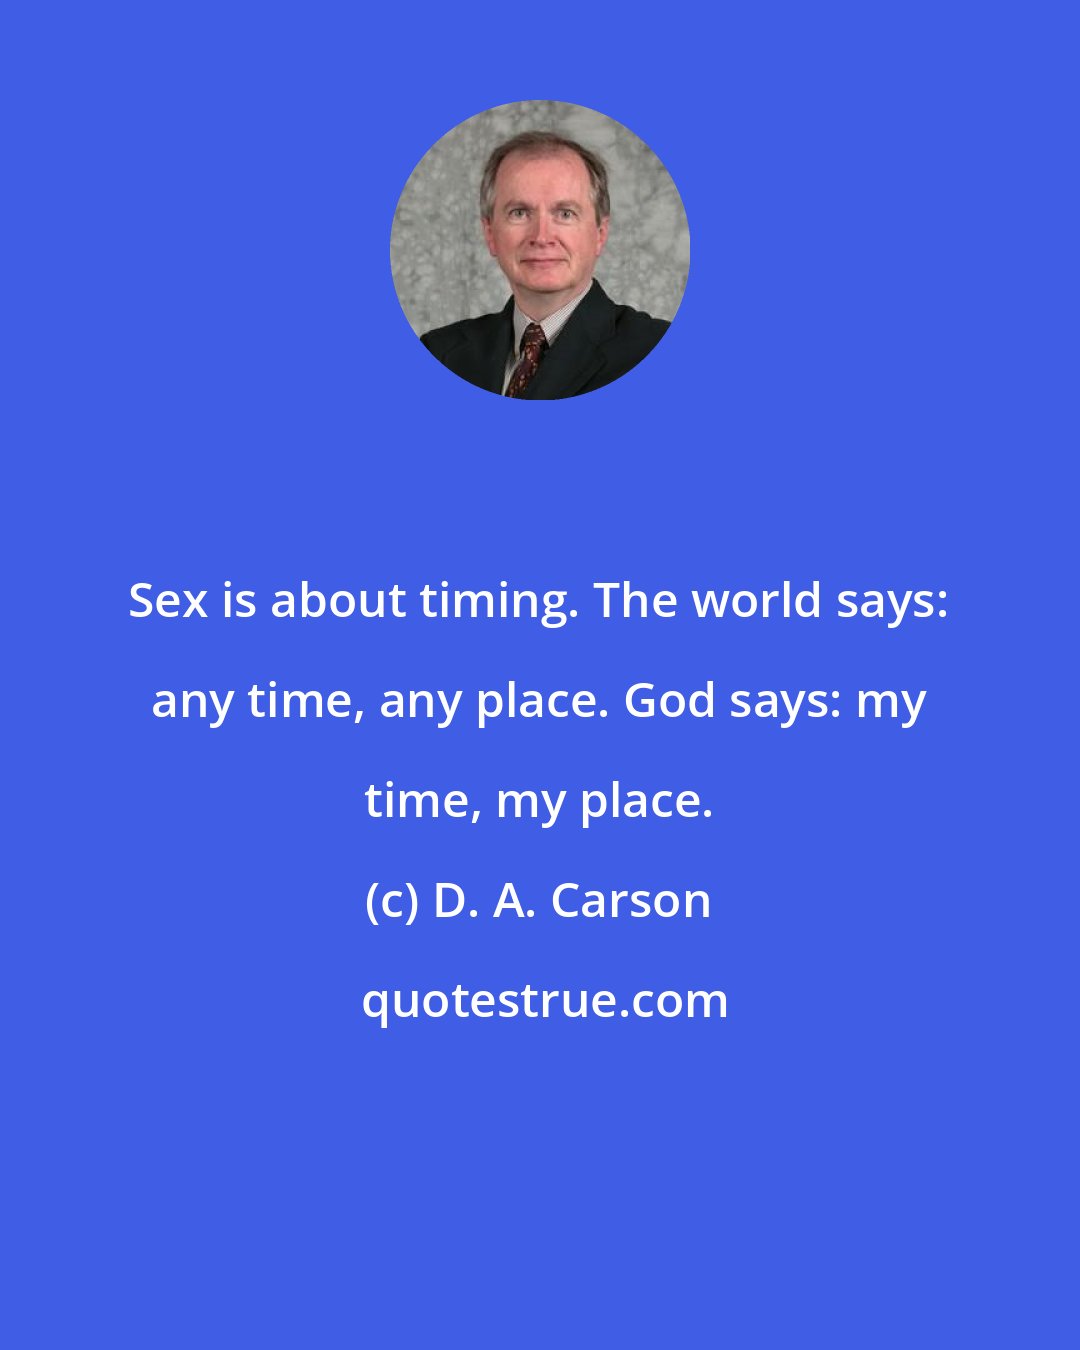 D. A. Carson: Sex is about timing. The world says: any time, any place. God says: my time, my place.